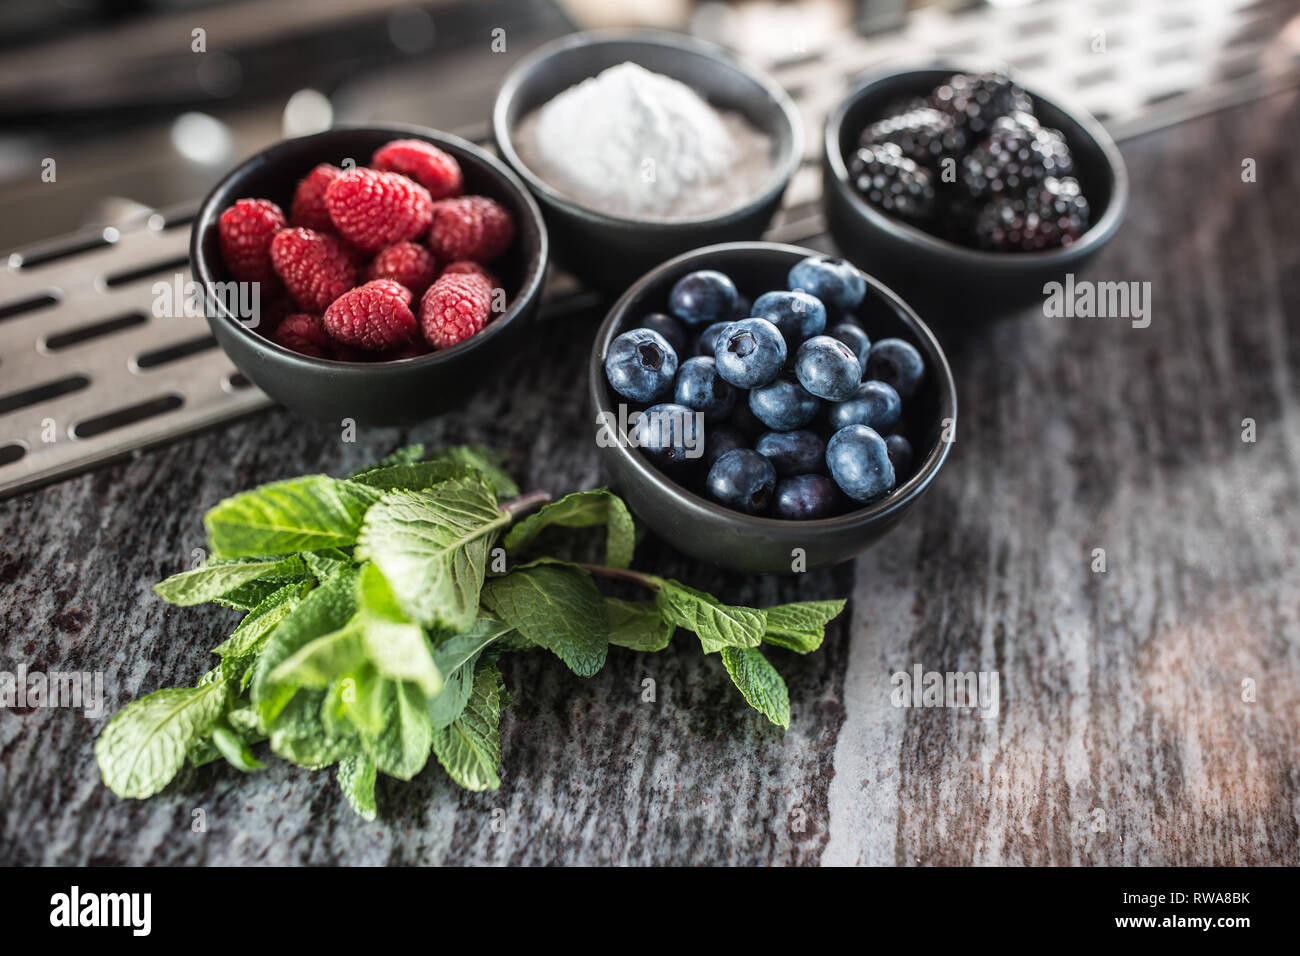 Blueberies raspberries blackberries sugar and mint at barcounter in night club or restaurant. Stock Photo